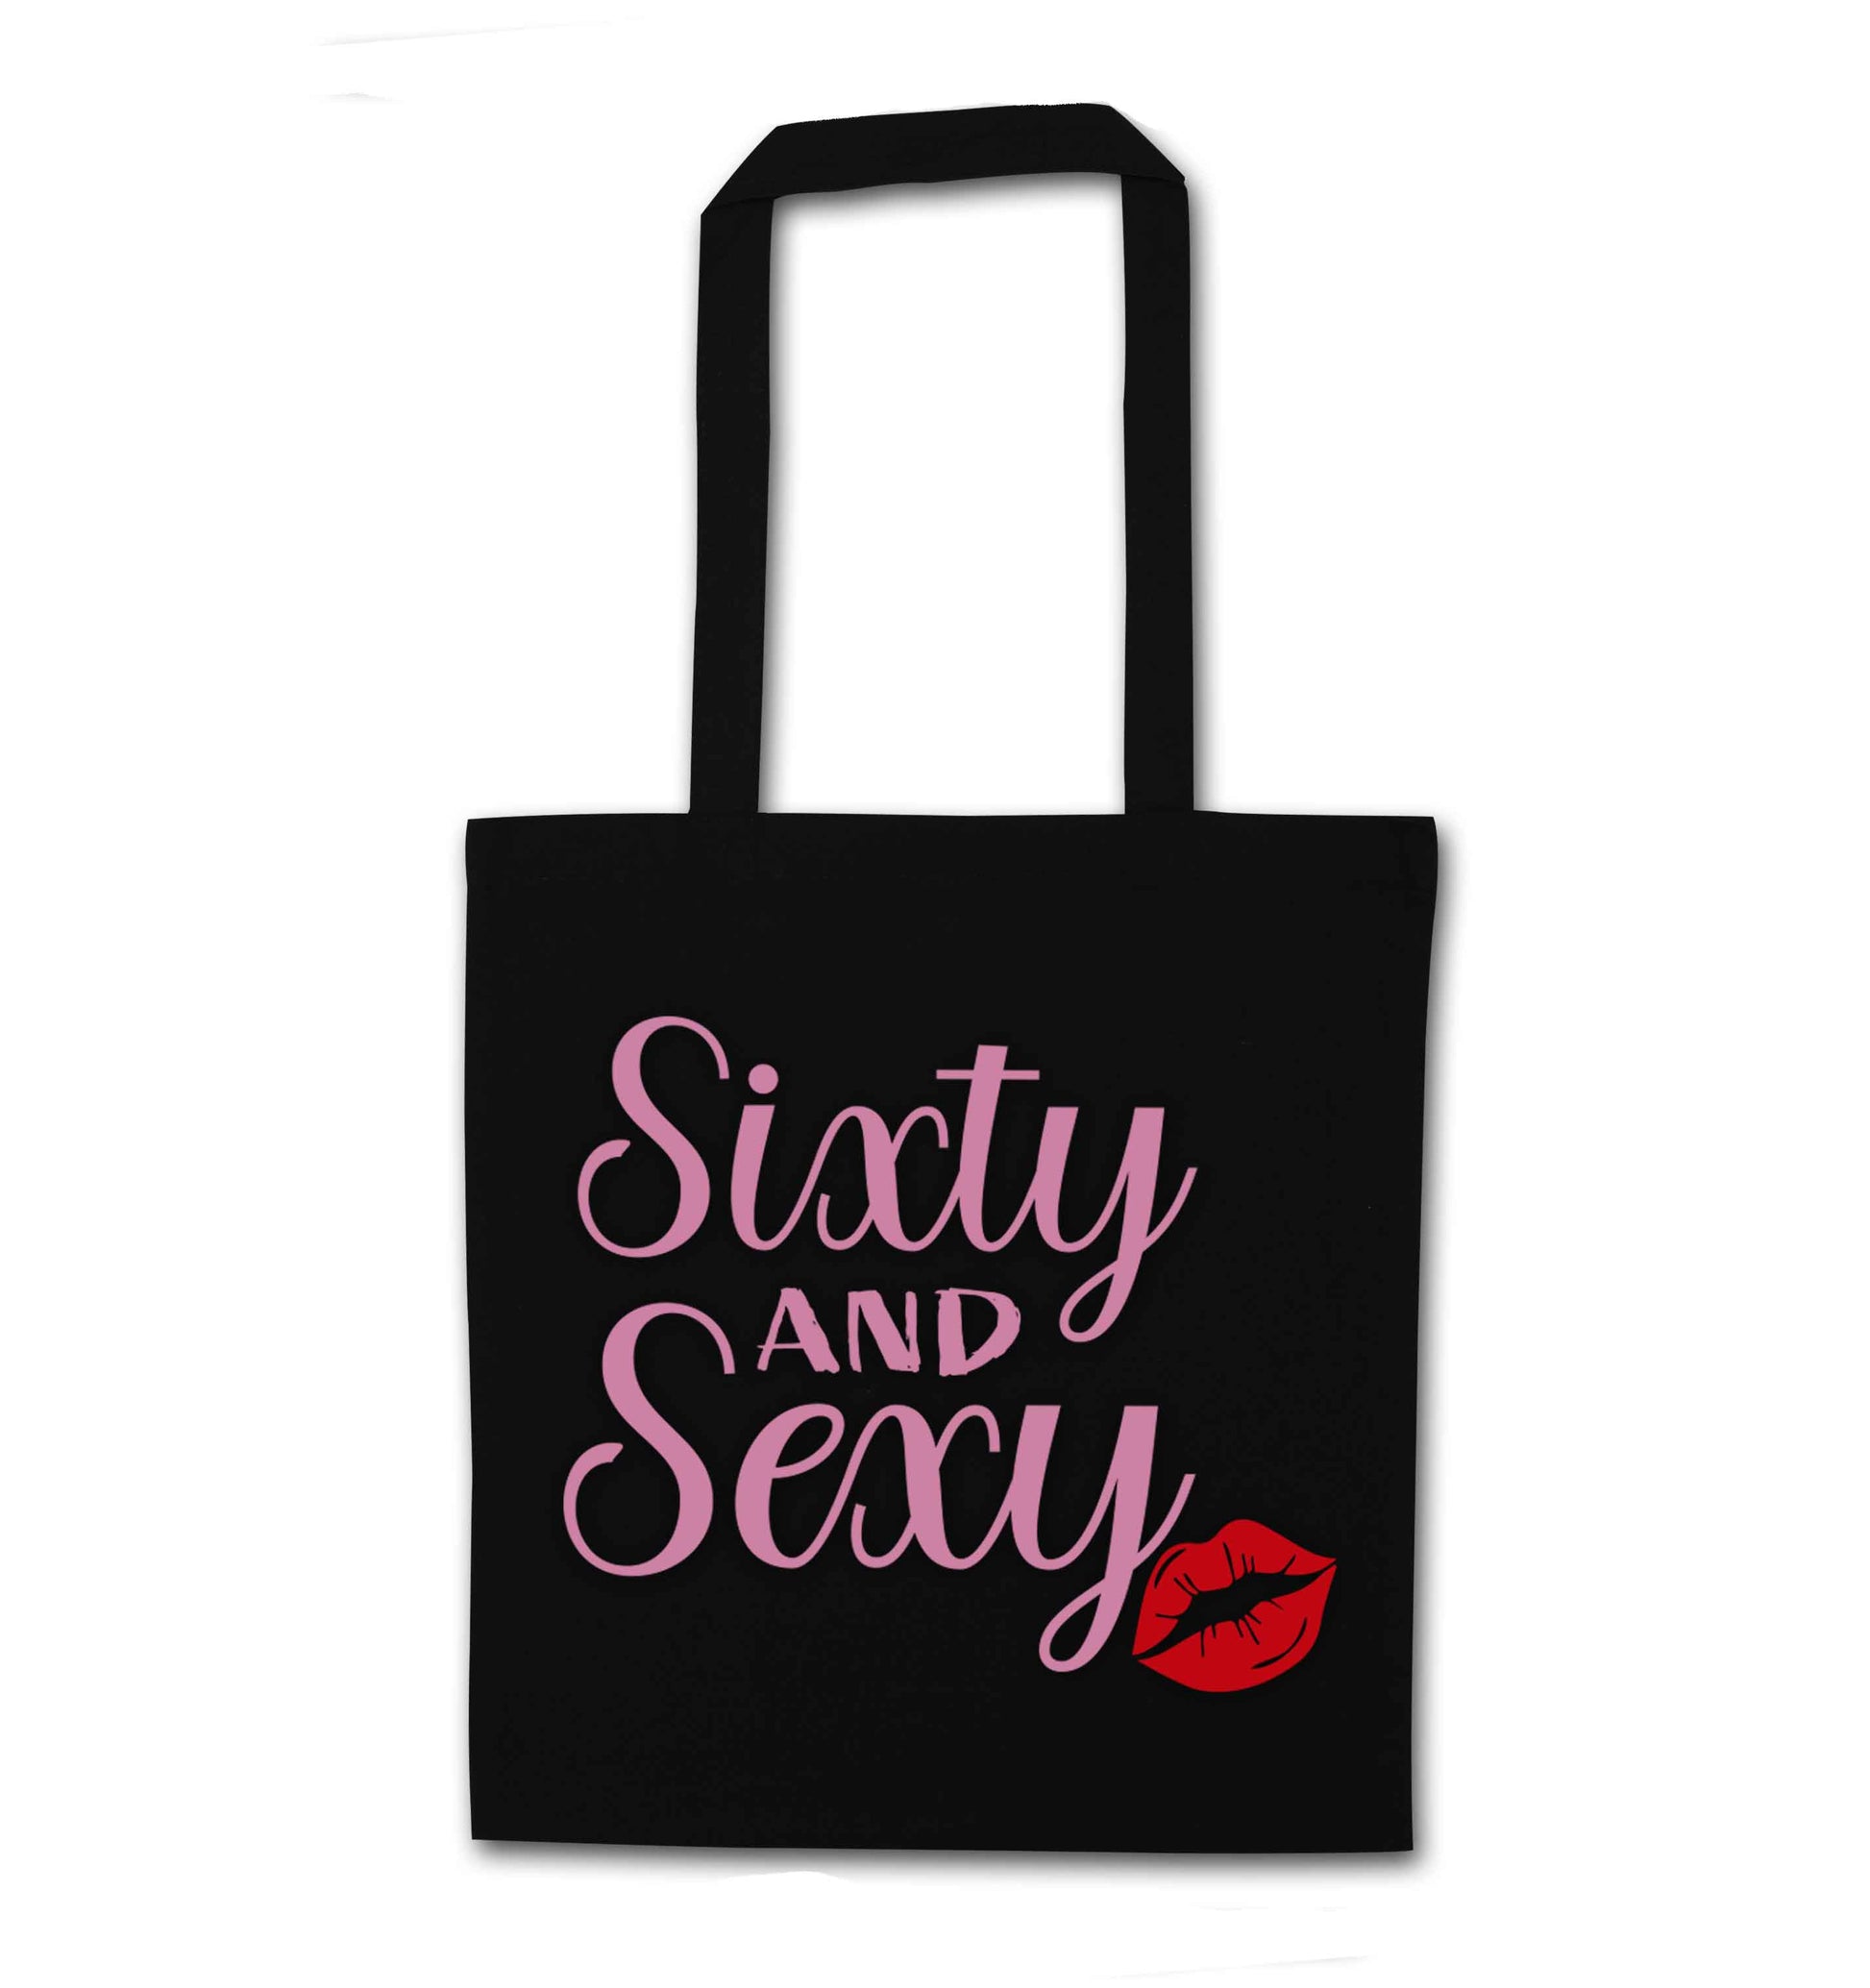 Sixty and sexy black tote bag